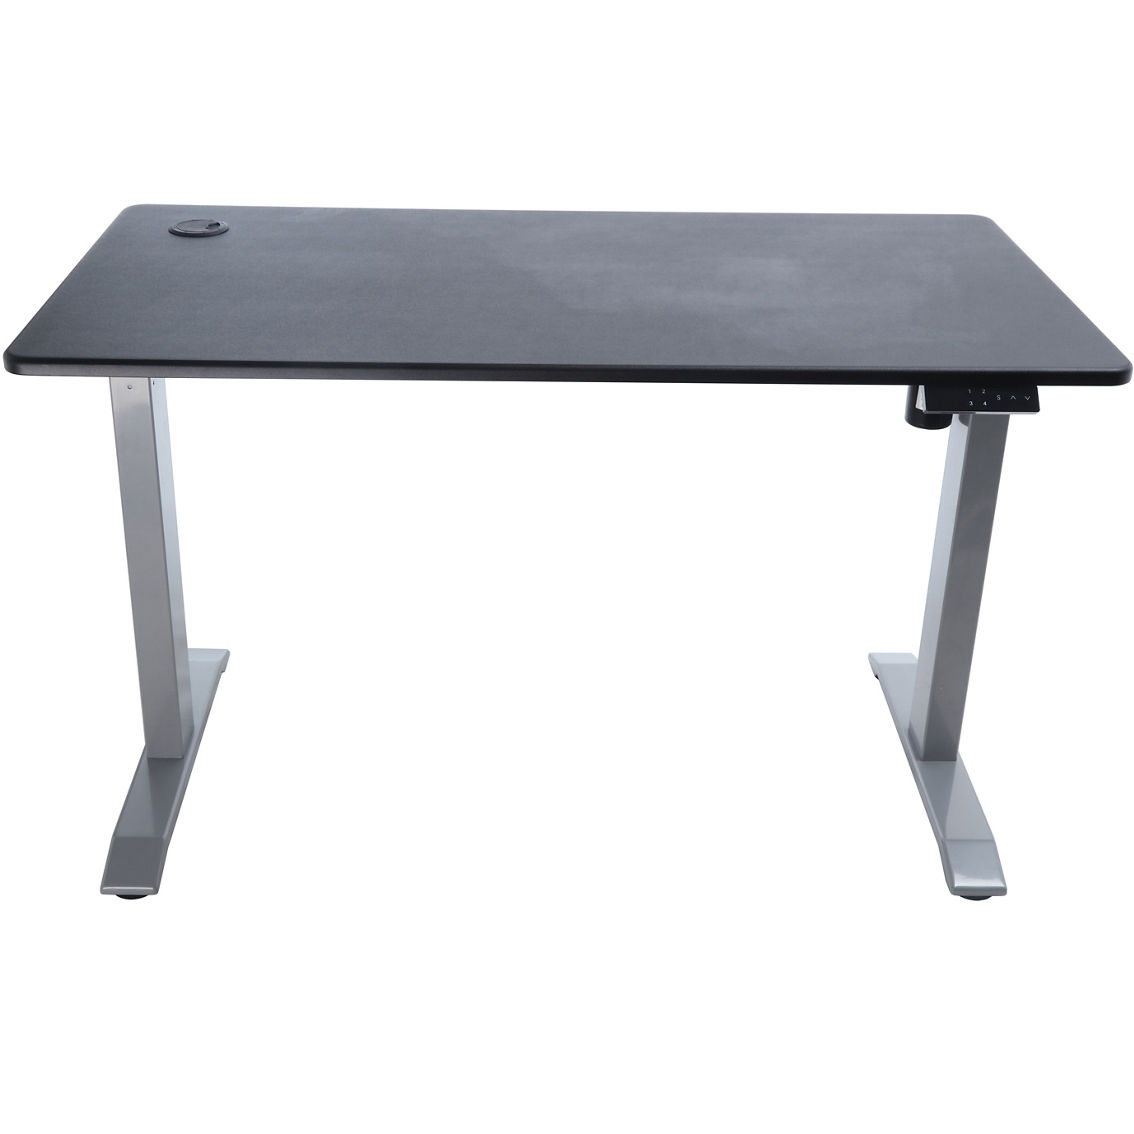 Simply Perfect Sit or Stand Electric Height Adjustable Desk - Image 2 of 4